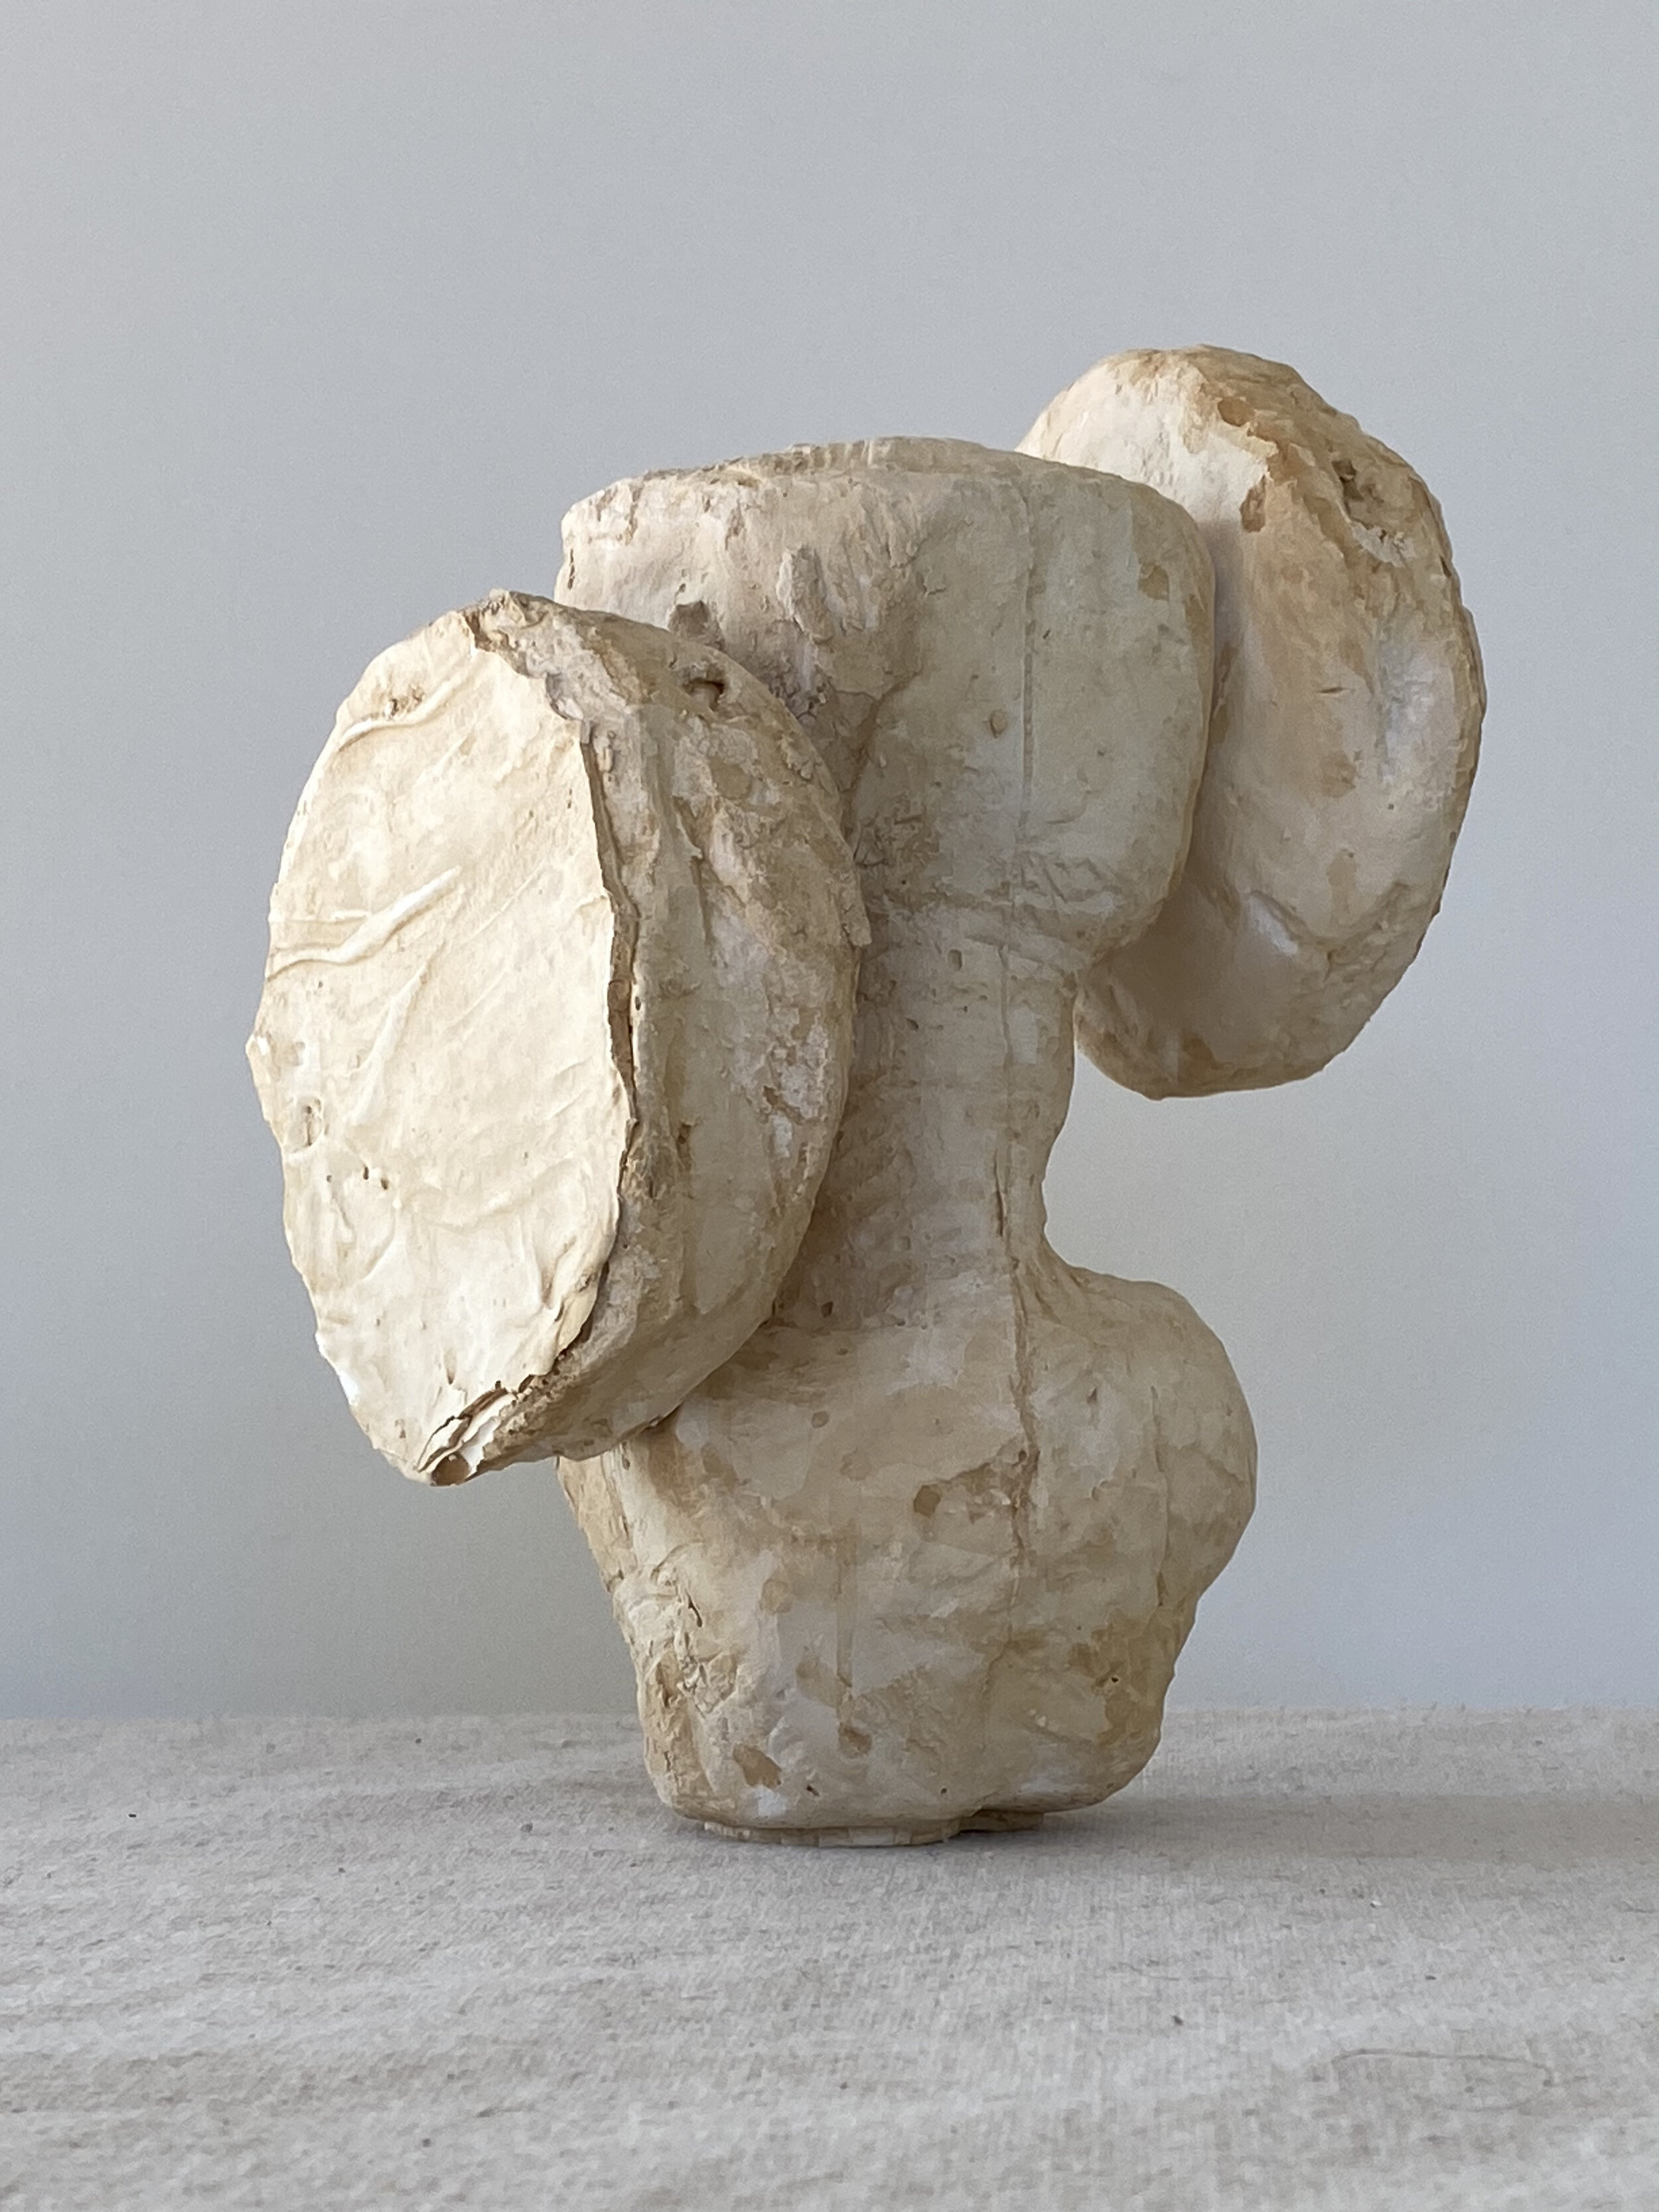 I Can't Listen, 2020. 6x9x5 inches, plaster.